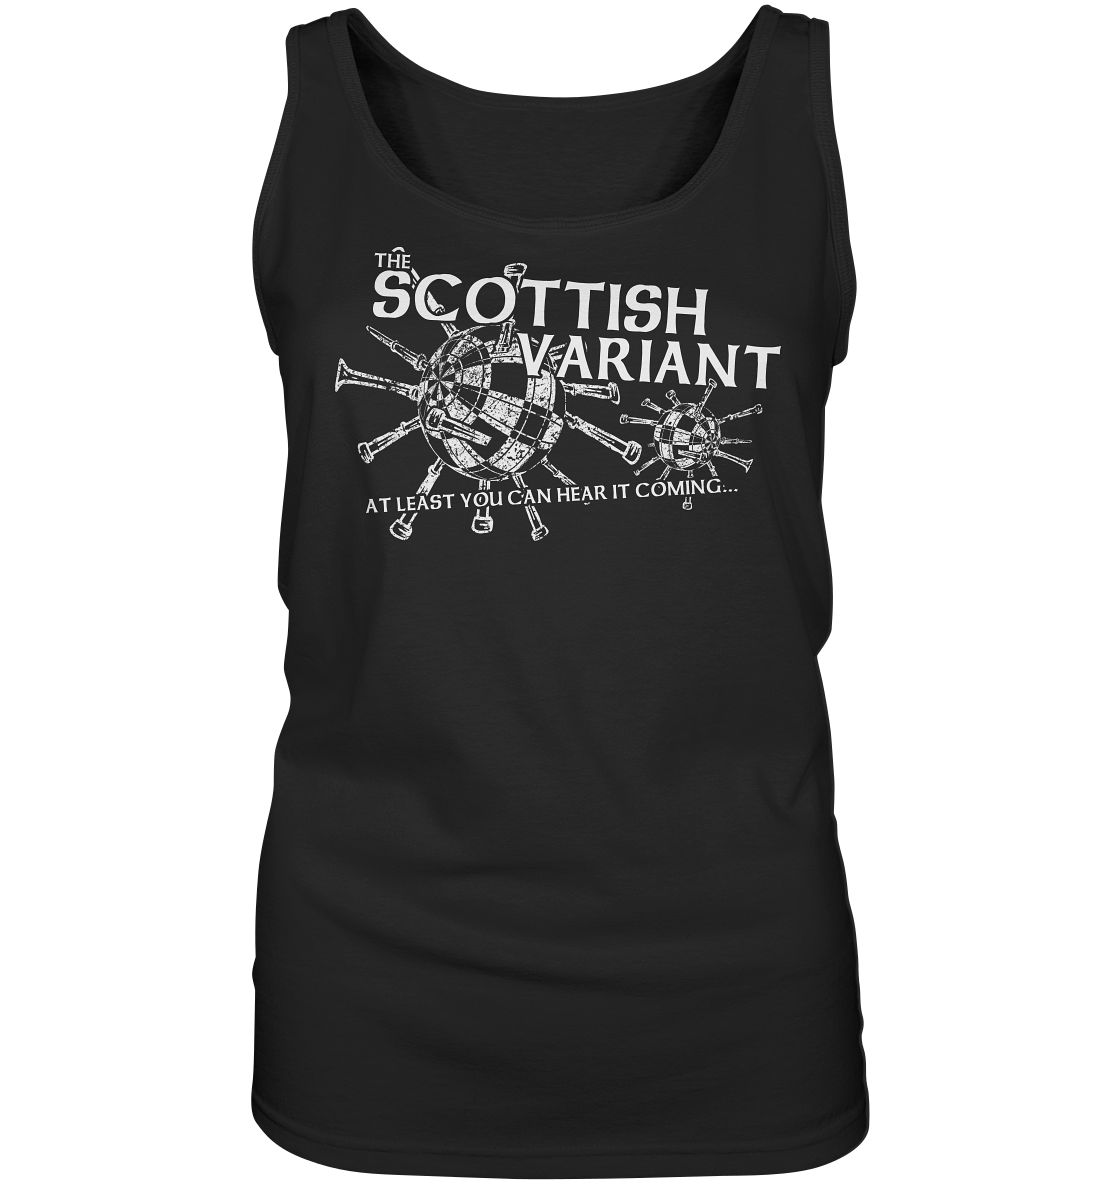 The Scottish Variant "At Least You Can Hear It Coming" - Ladies Tank-Top